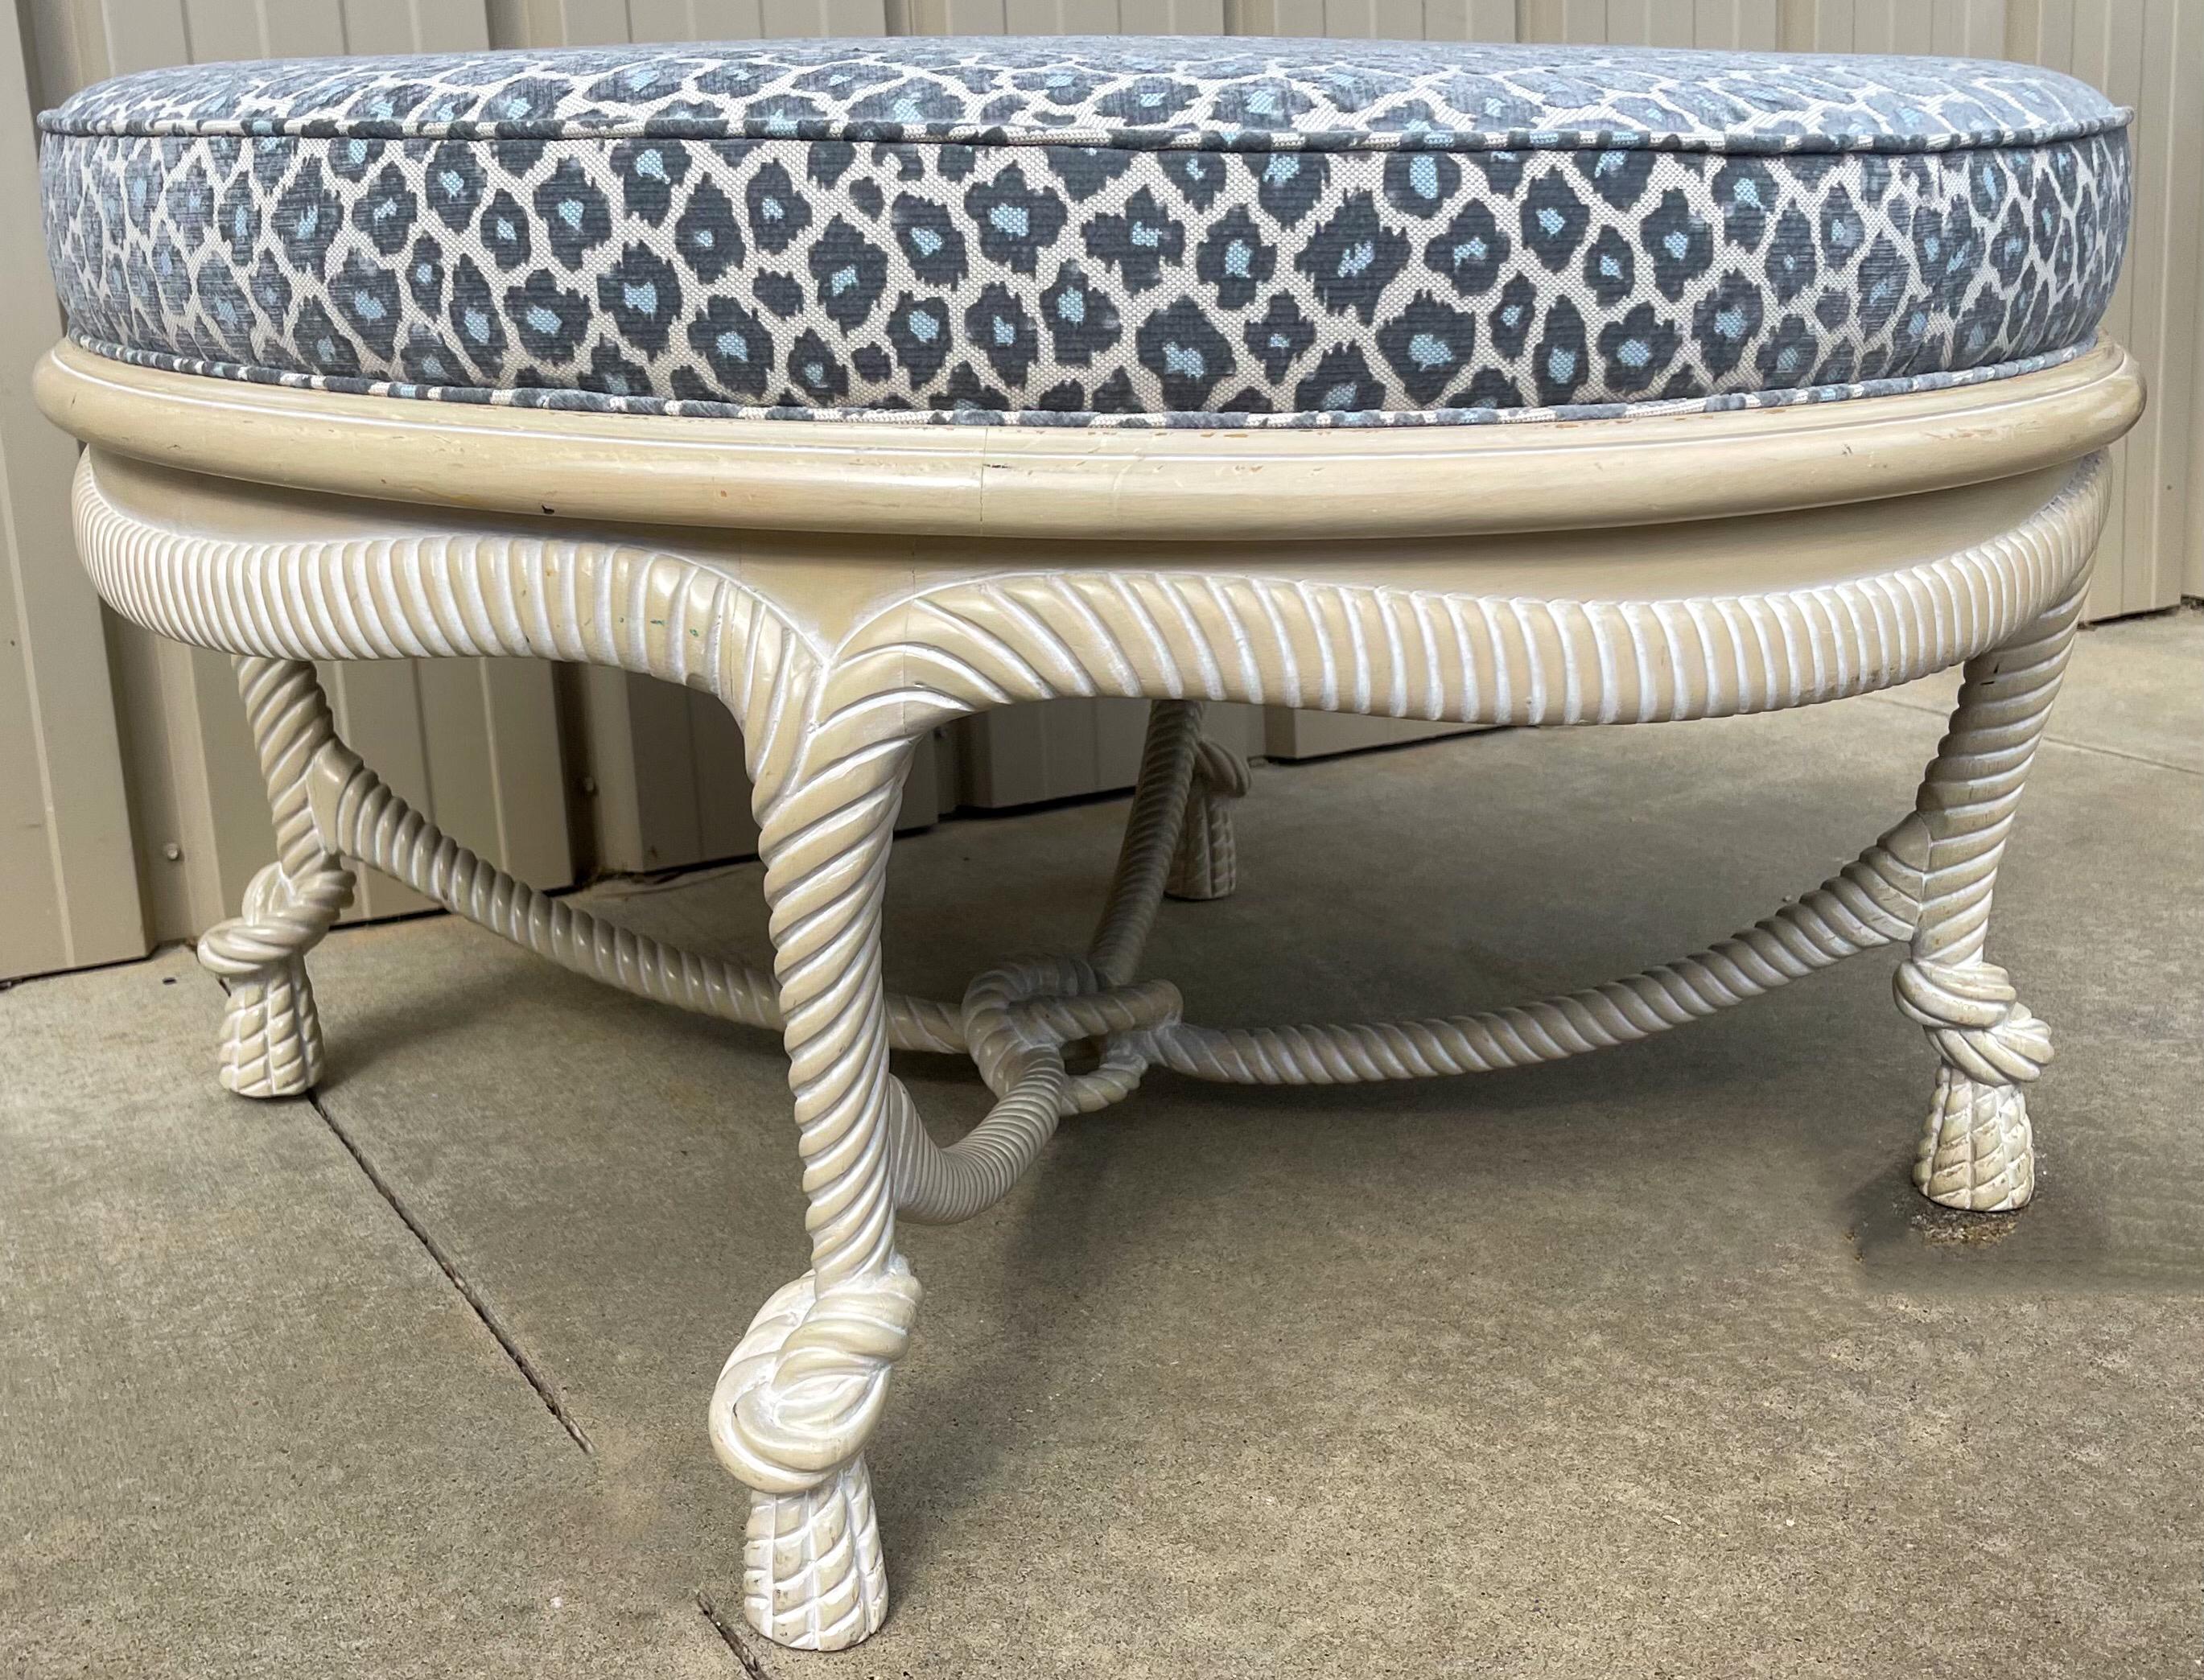 American Large Scale Cerused Frame Rope Twist Coffee Table / Ottoman in Leopard Fabric